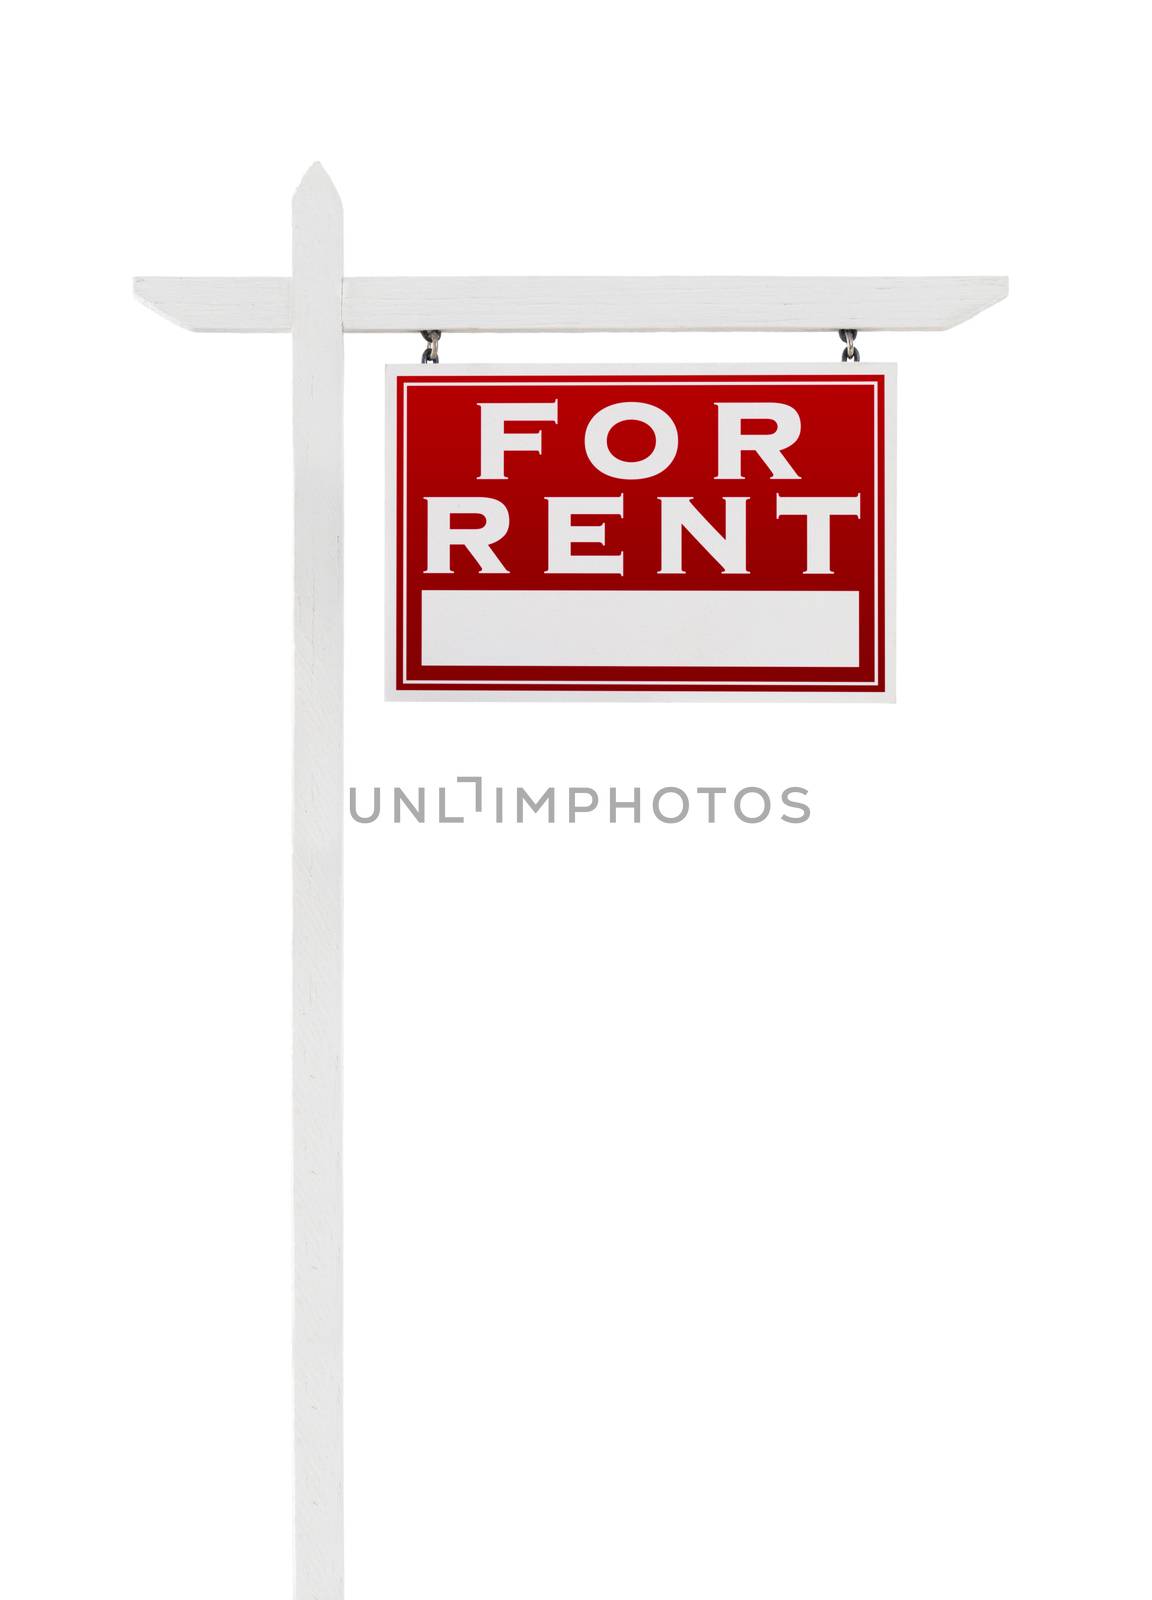 Right Facing For Rent Real Estate Sign Isolated on a White Backg by Feverpitched